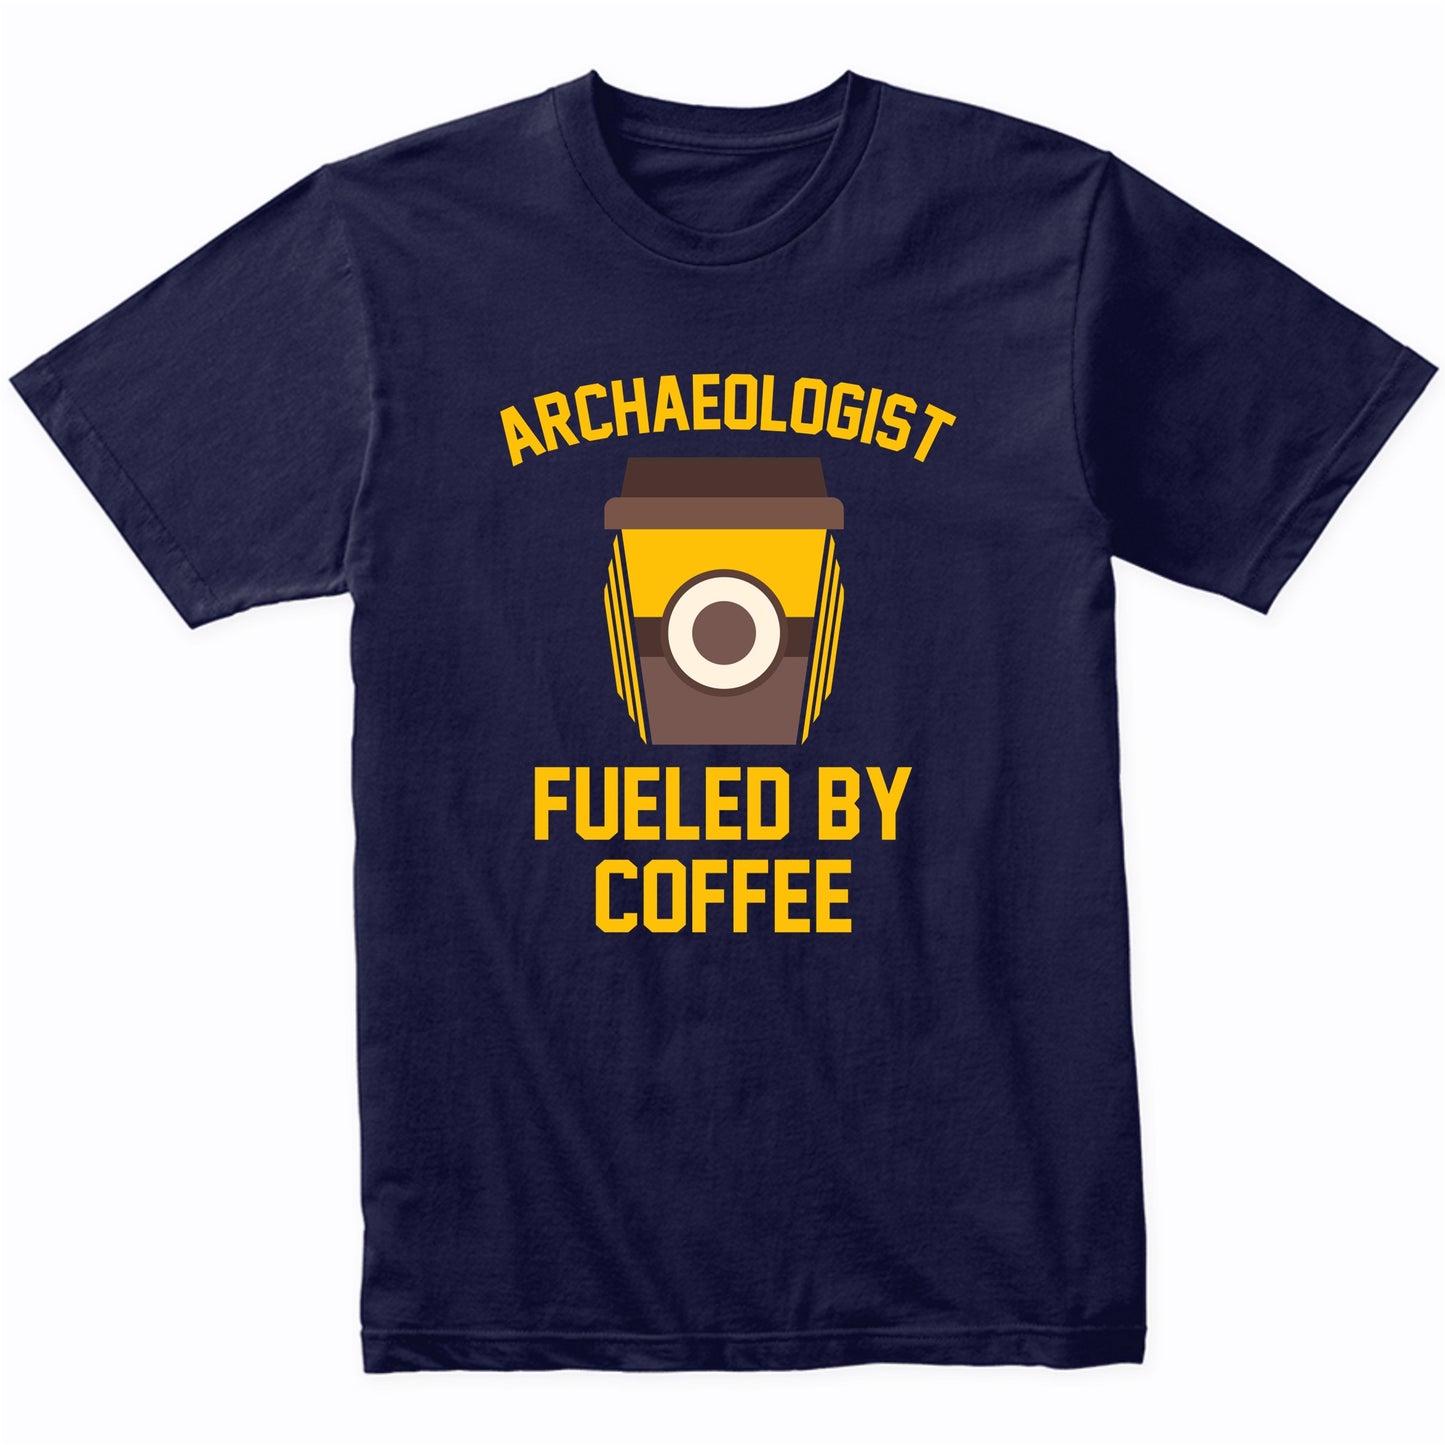 Archaeologist Fueled By Coffee Funny Archaeology Shirt